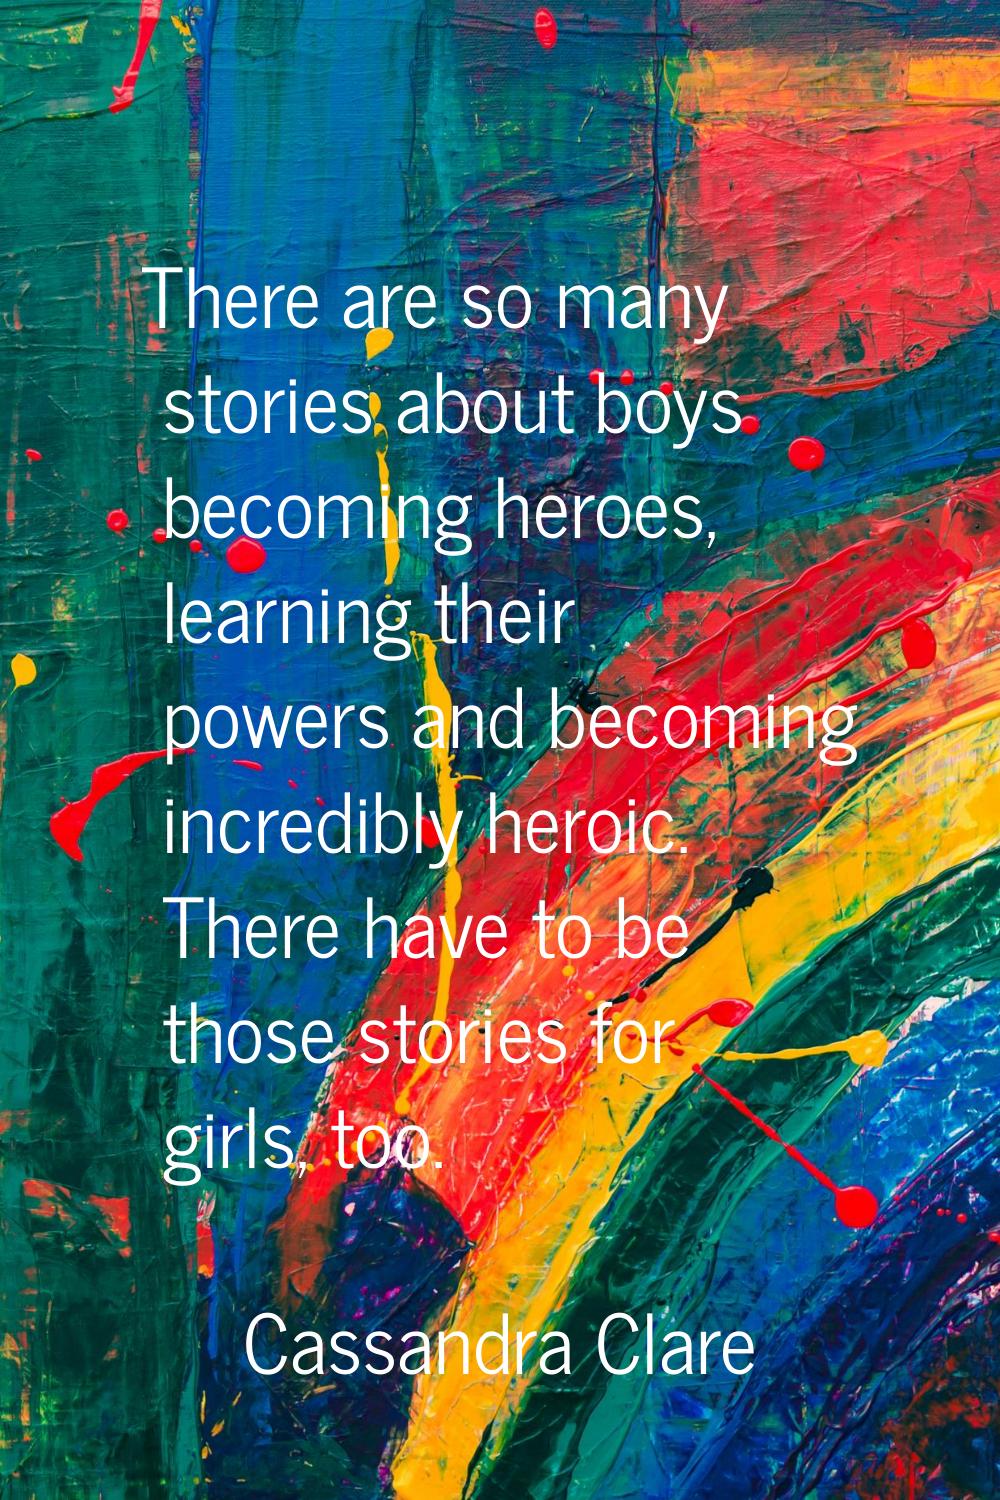 There are so many stories about boys becoming heroes, learning their powers and becoming incredibly